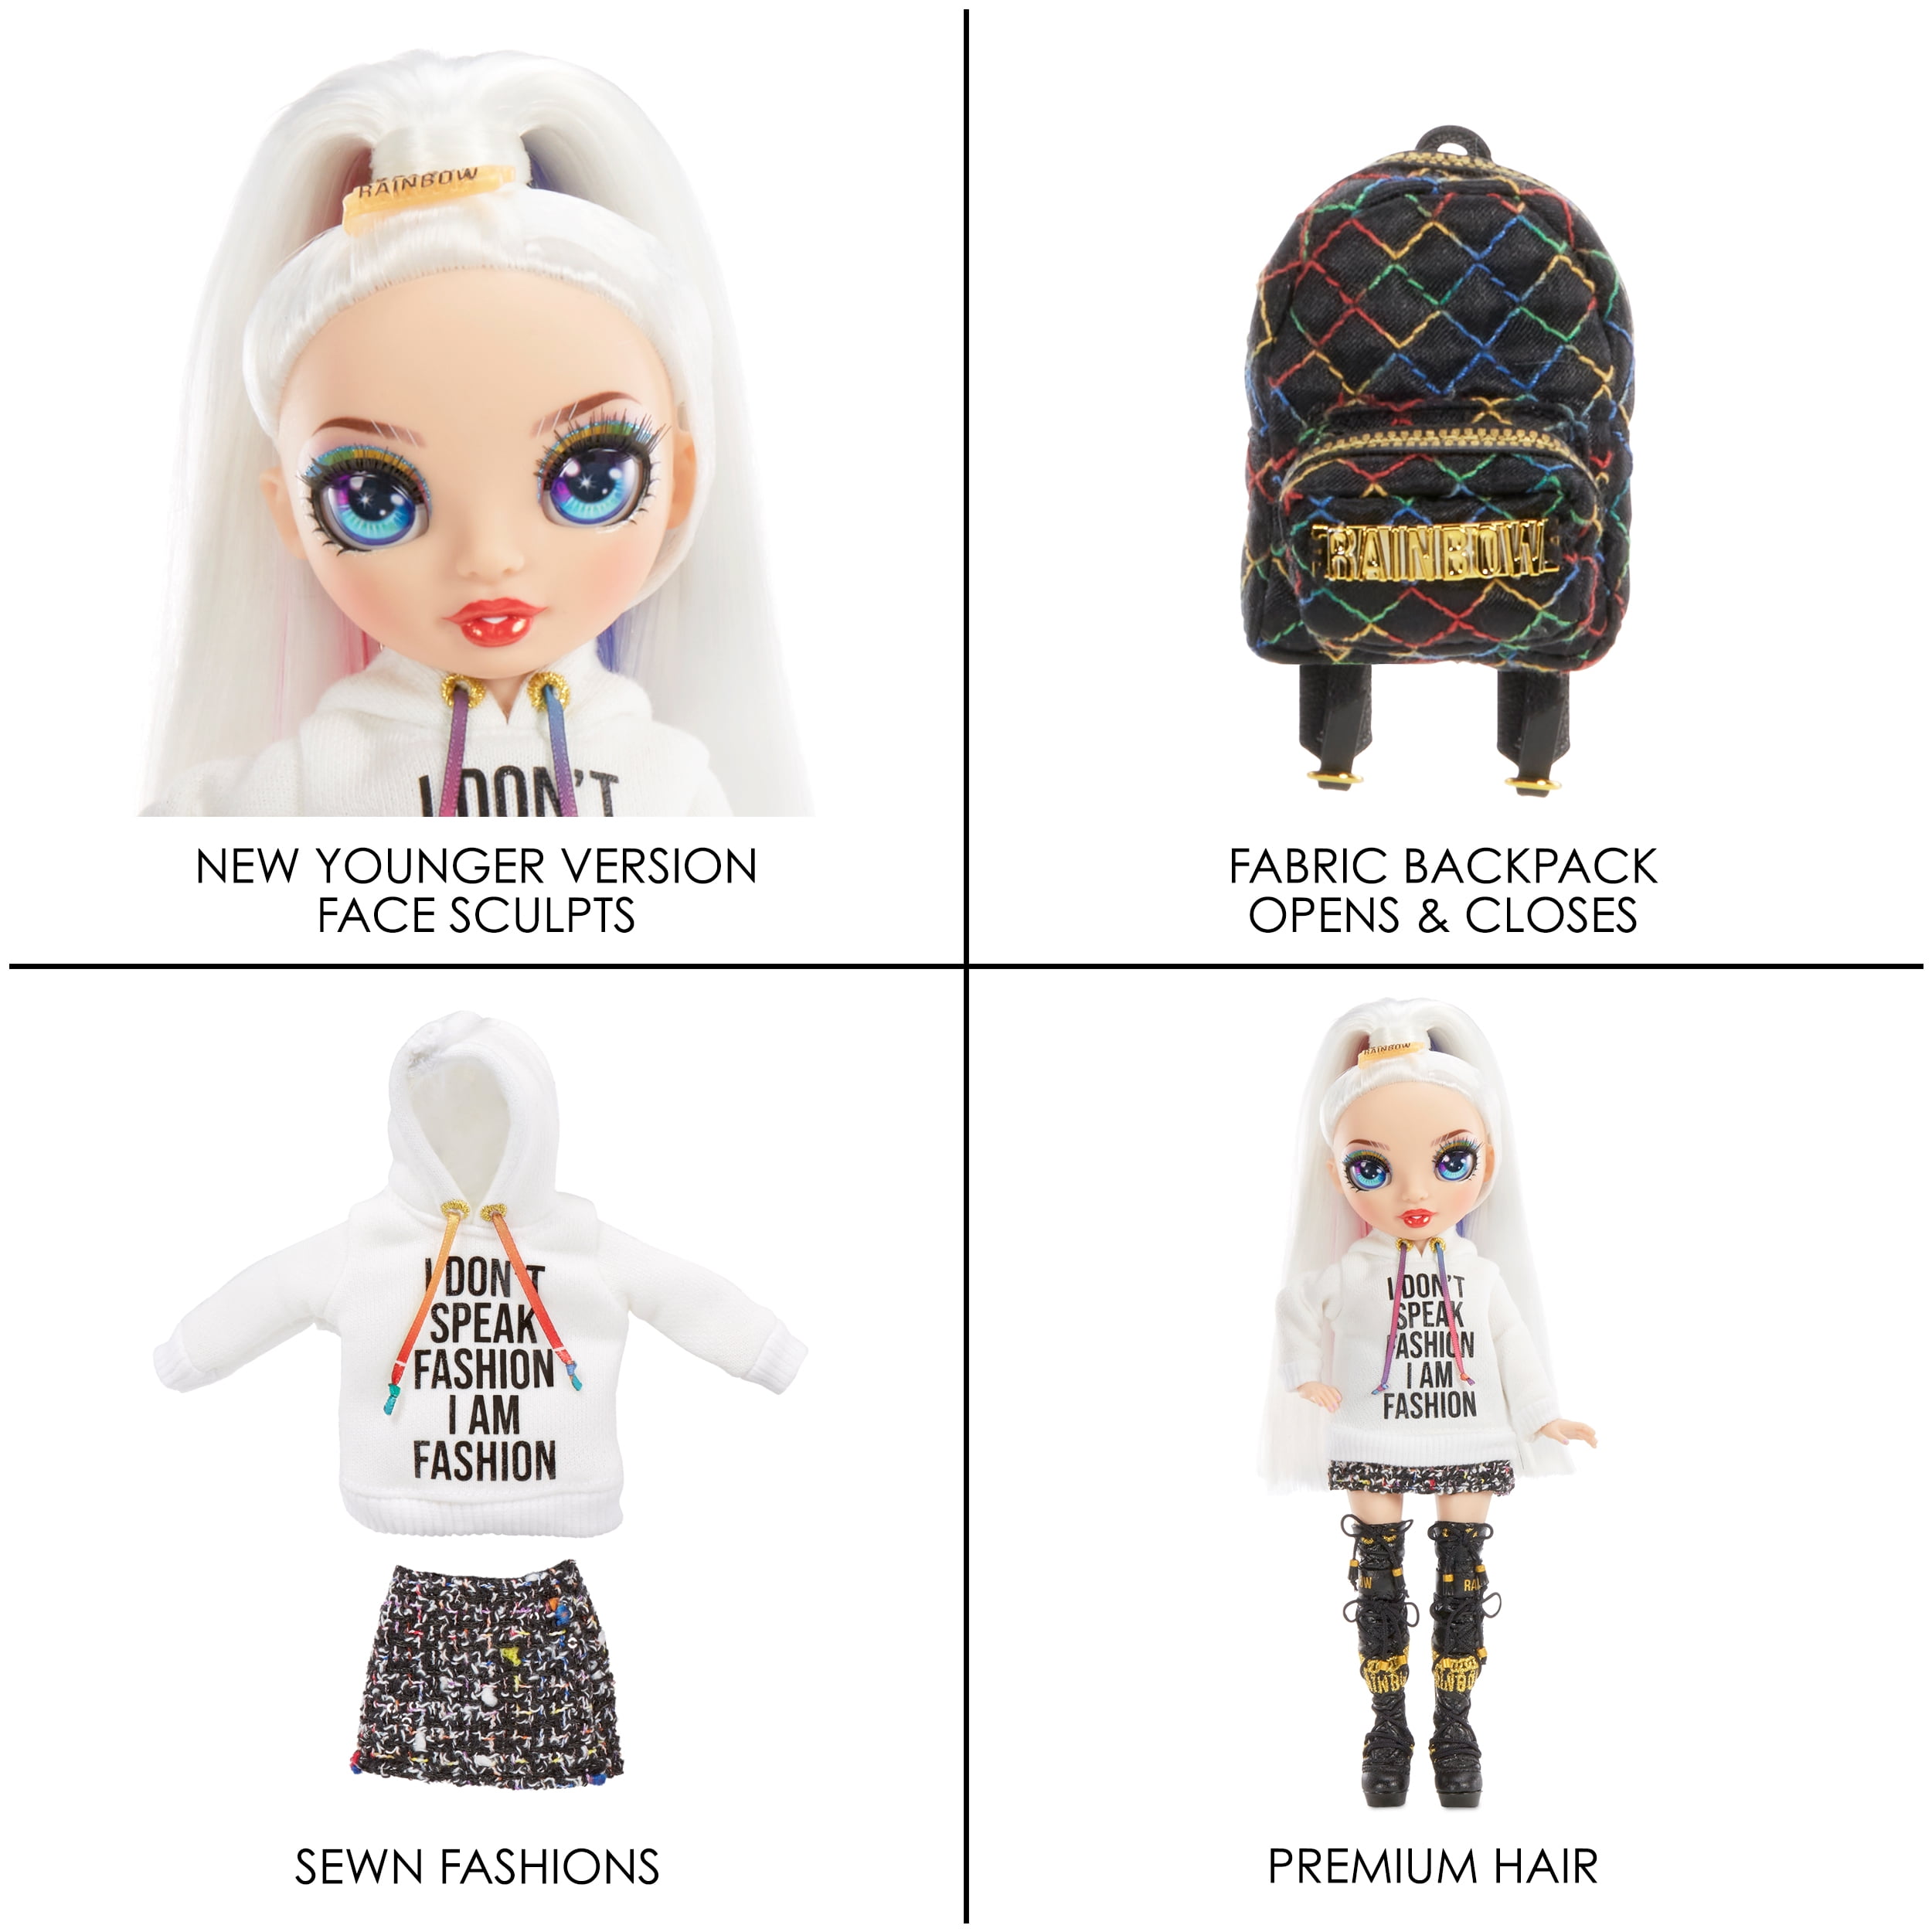 Rainbow High Jr High Series 2 Amaya Raine- 9 Rainbow Posable Fashion Doll  with Designer Accessories and Open/Close Backpack. Great Toy Gift for Kids